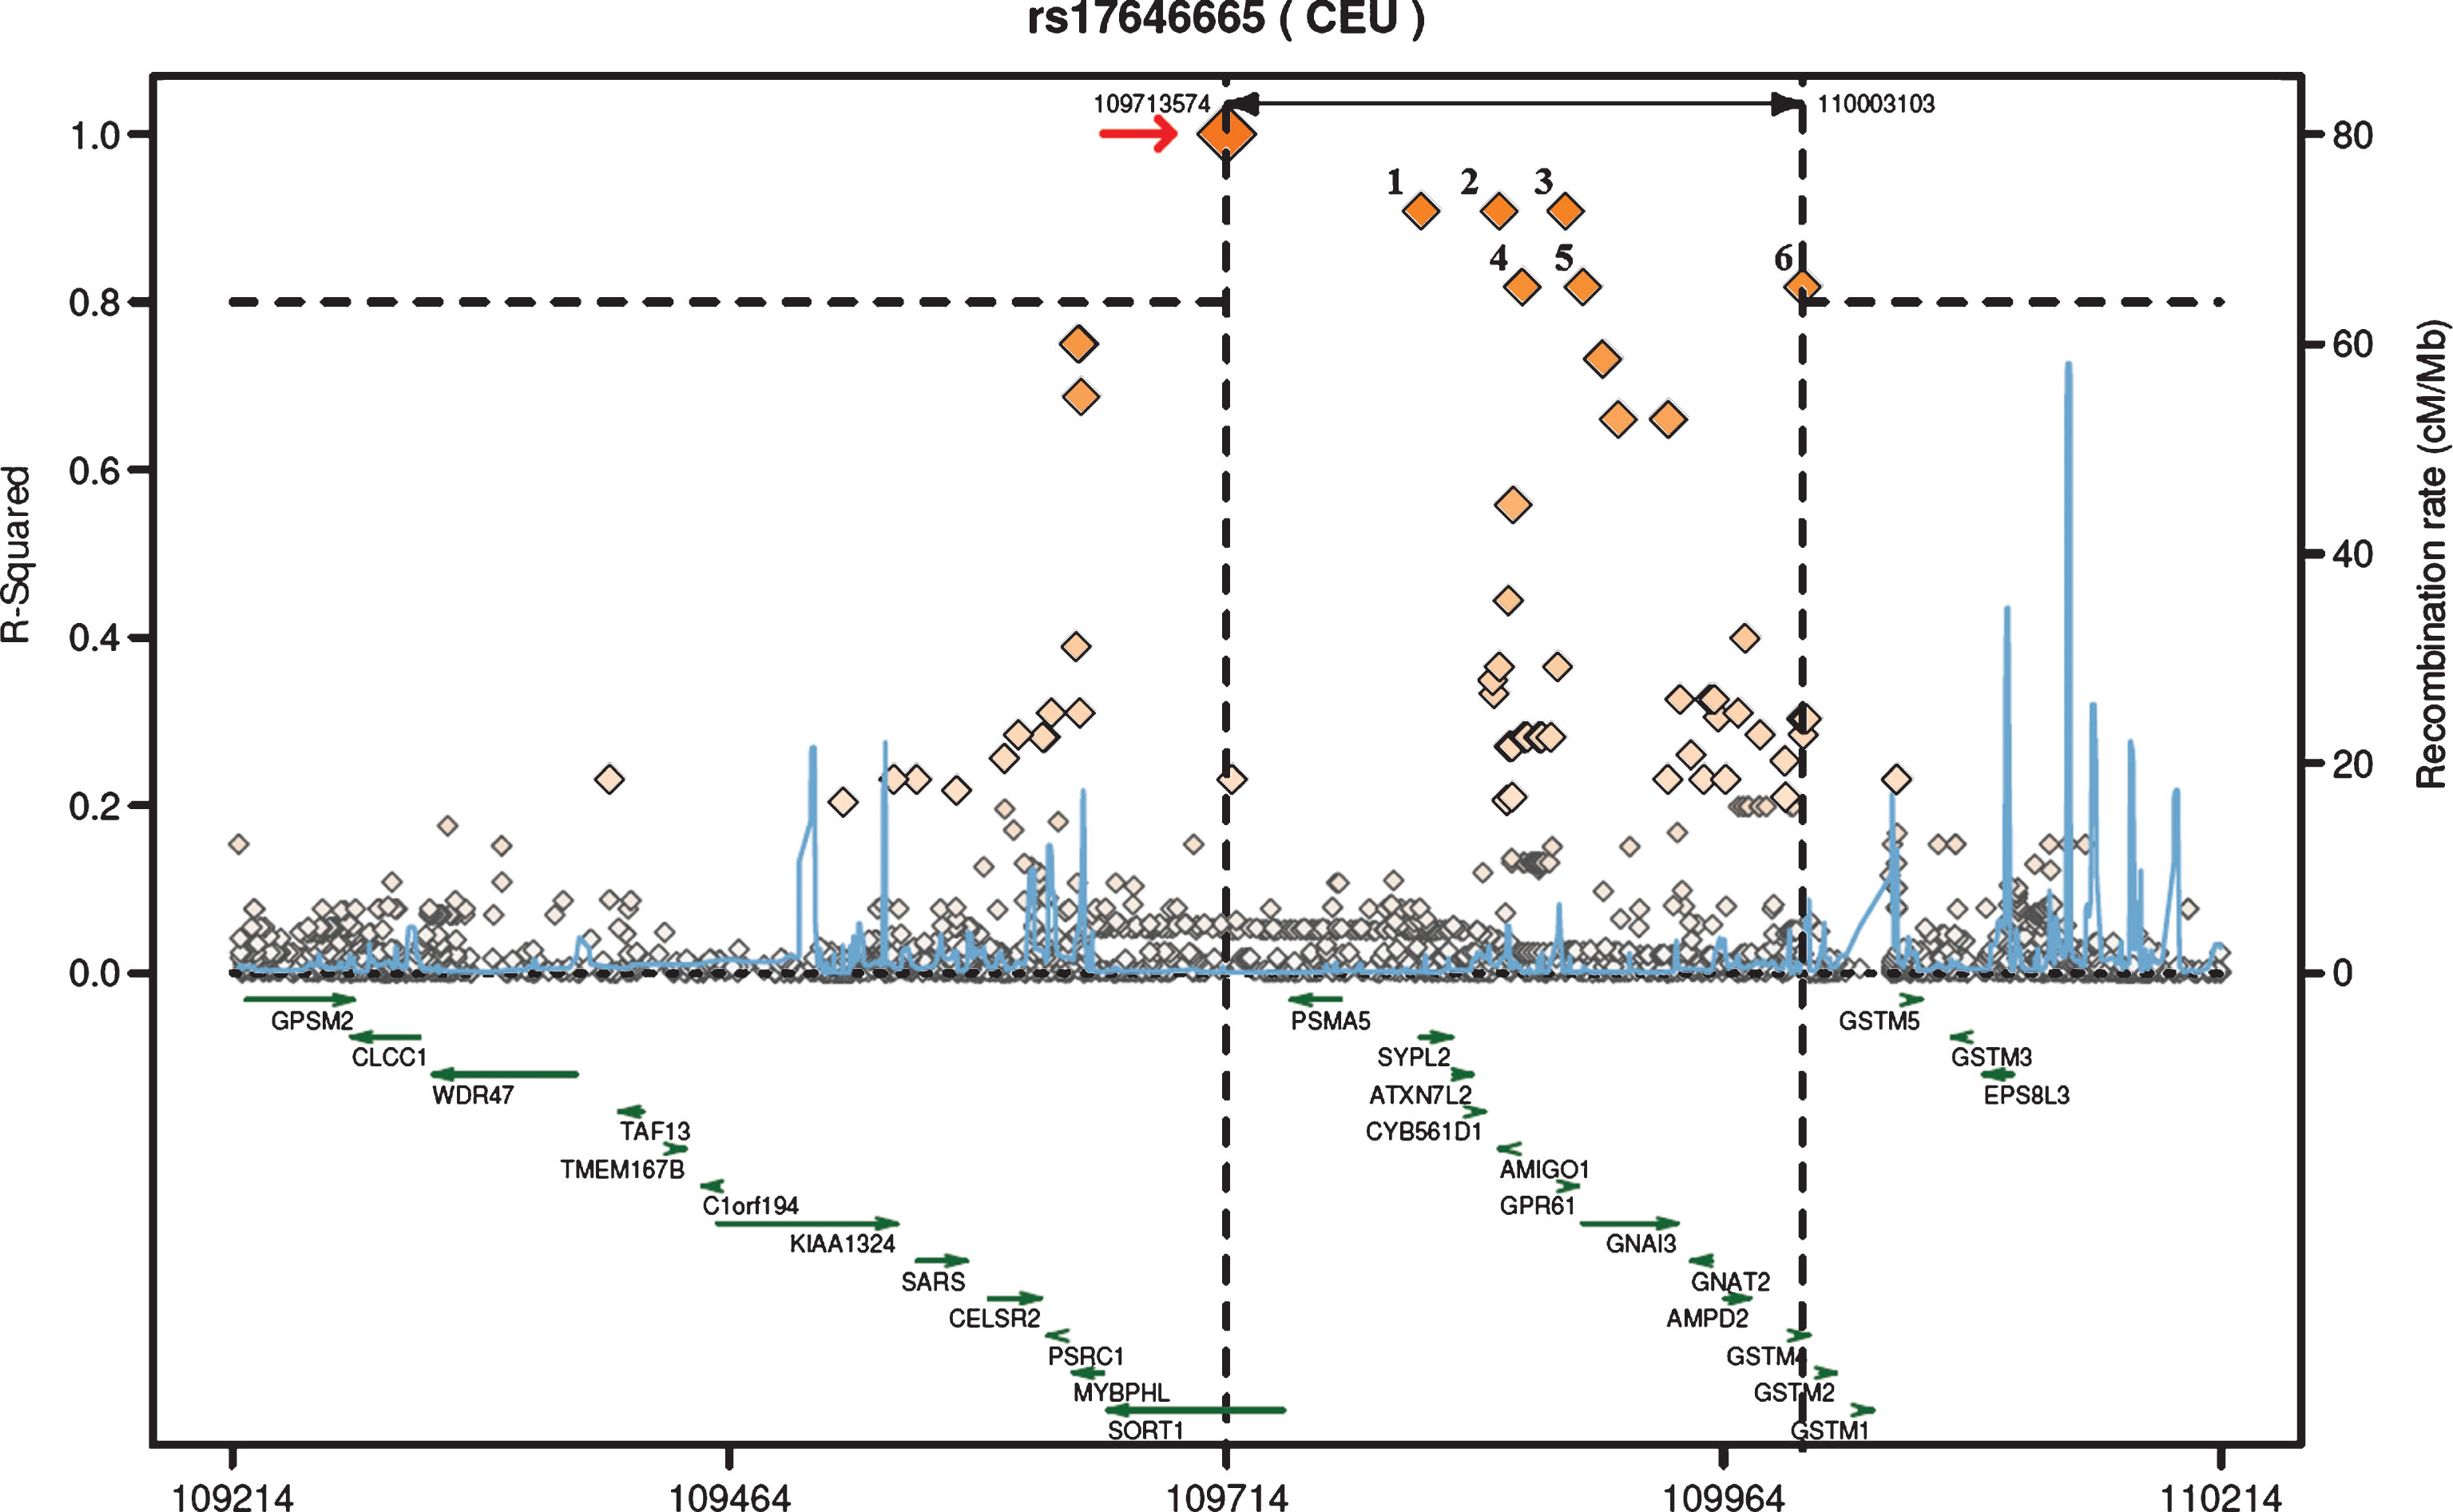 The regional LD plot was created from a published CEU population panel for rs17646665, located in SORT1 (marked by the arrow) with 500 kb flanking genomic regions on each side. The r2 threshold was set to 0.8 and six SNPs were identified with r2 >0.8 for this region, all of which were located in other genes than SORT1. The SNPs are indicated by the numbers over the boxes (1: SYPL2 (rs2272272), 2: AMIGO1 (rs17575427), 3: 5’ of GPR61 (rs552101), 4: between AMIGO1 and GPR61 (rs56018934), 5: GNAI3 (rs1279195) and 6: GSTM4 (rs650985)).